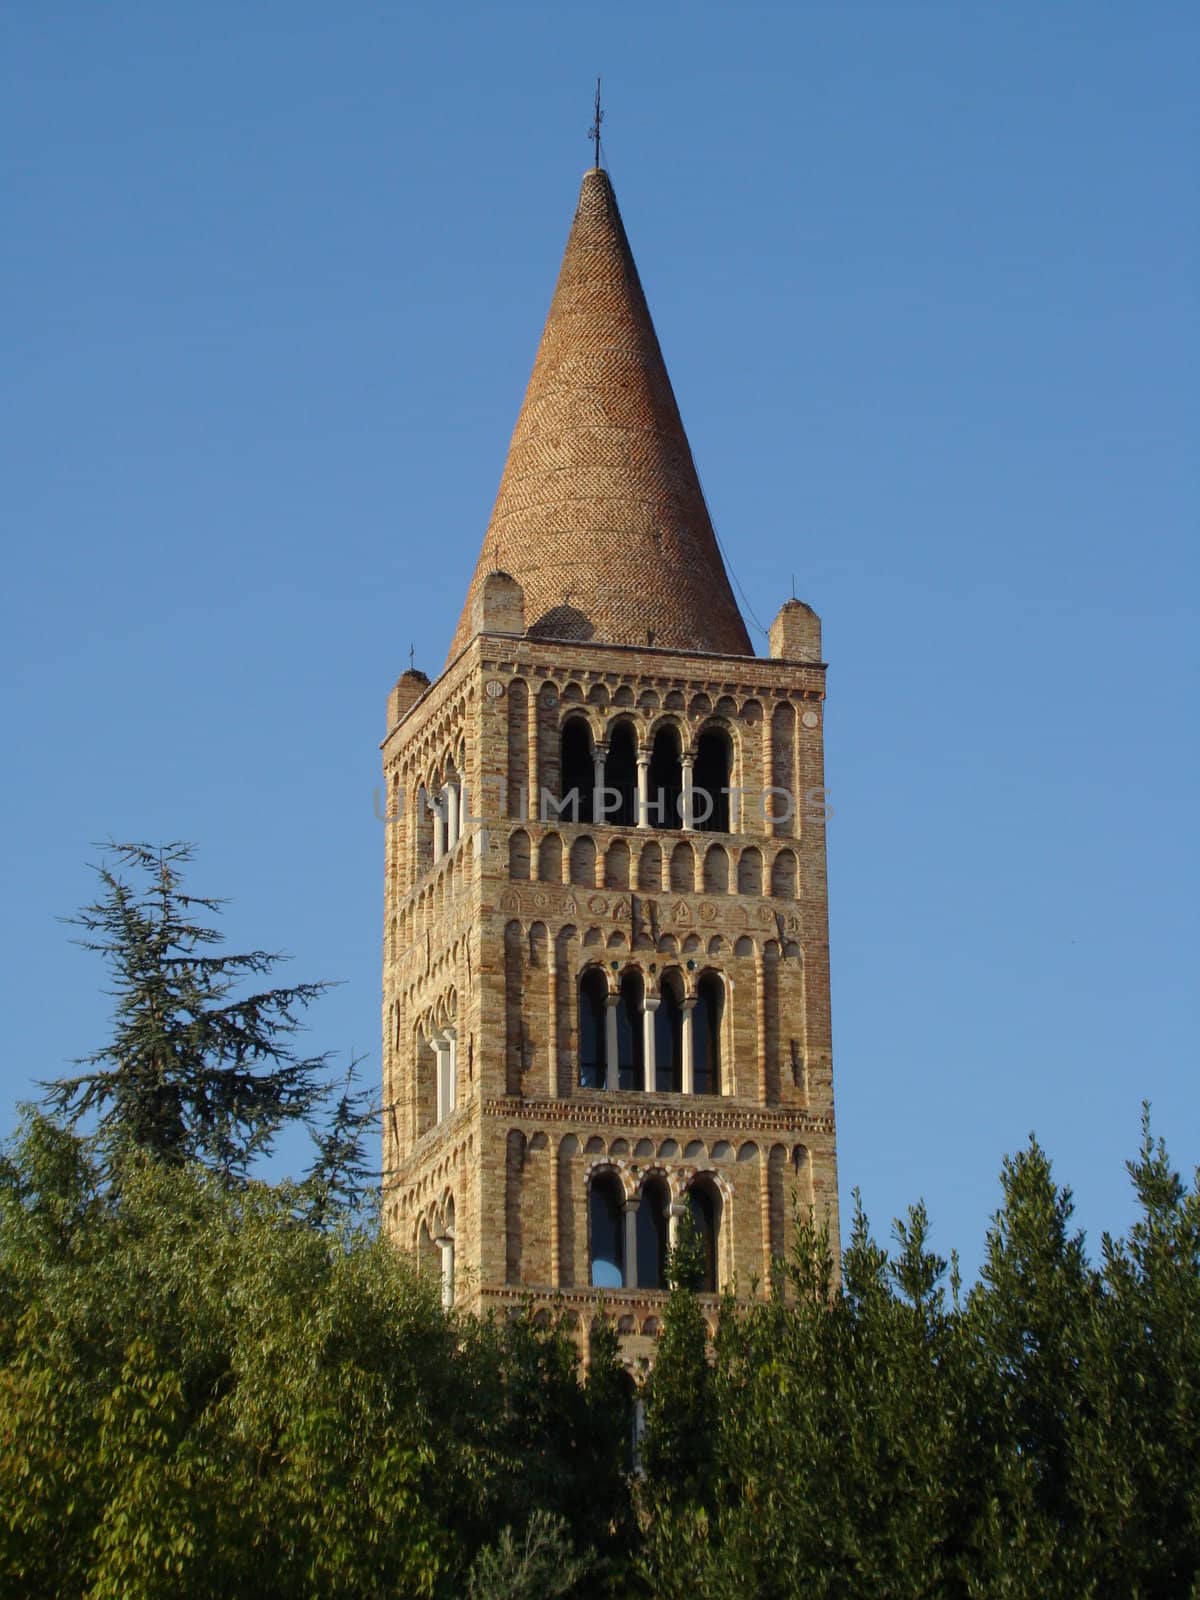 bell tower of Pomposa, benedictine  abbey in Emilia-Romagna region in north Italy. 2008